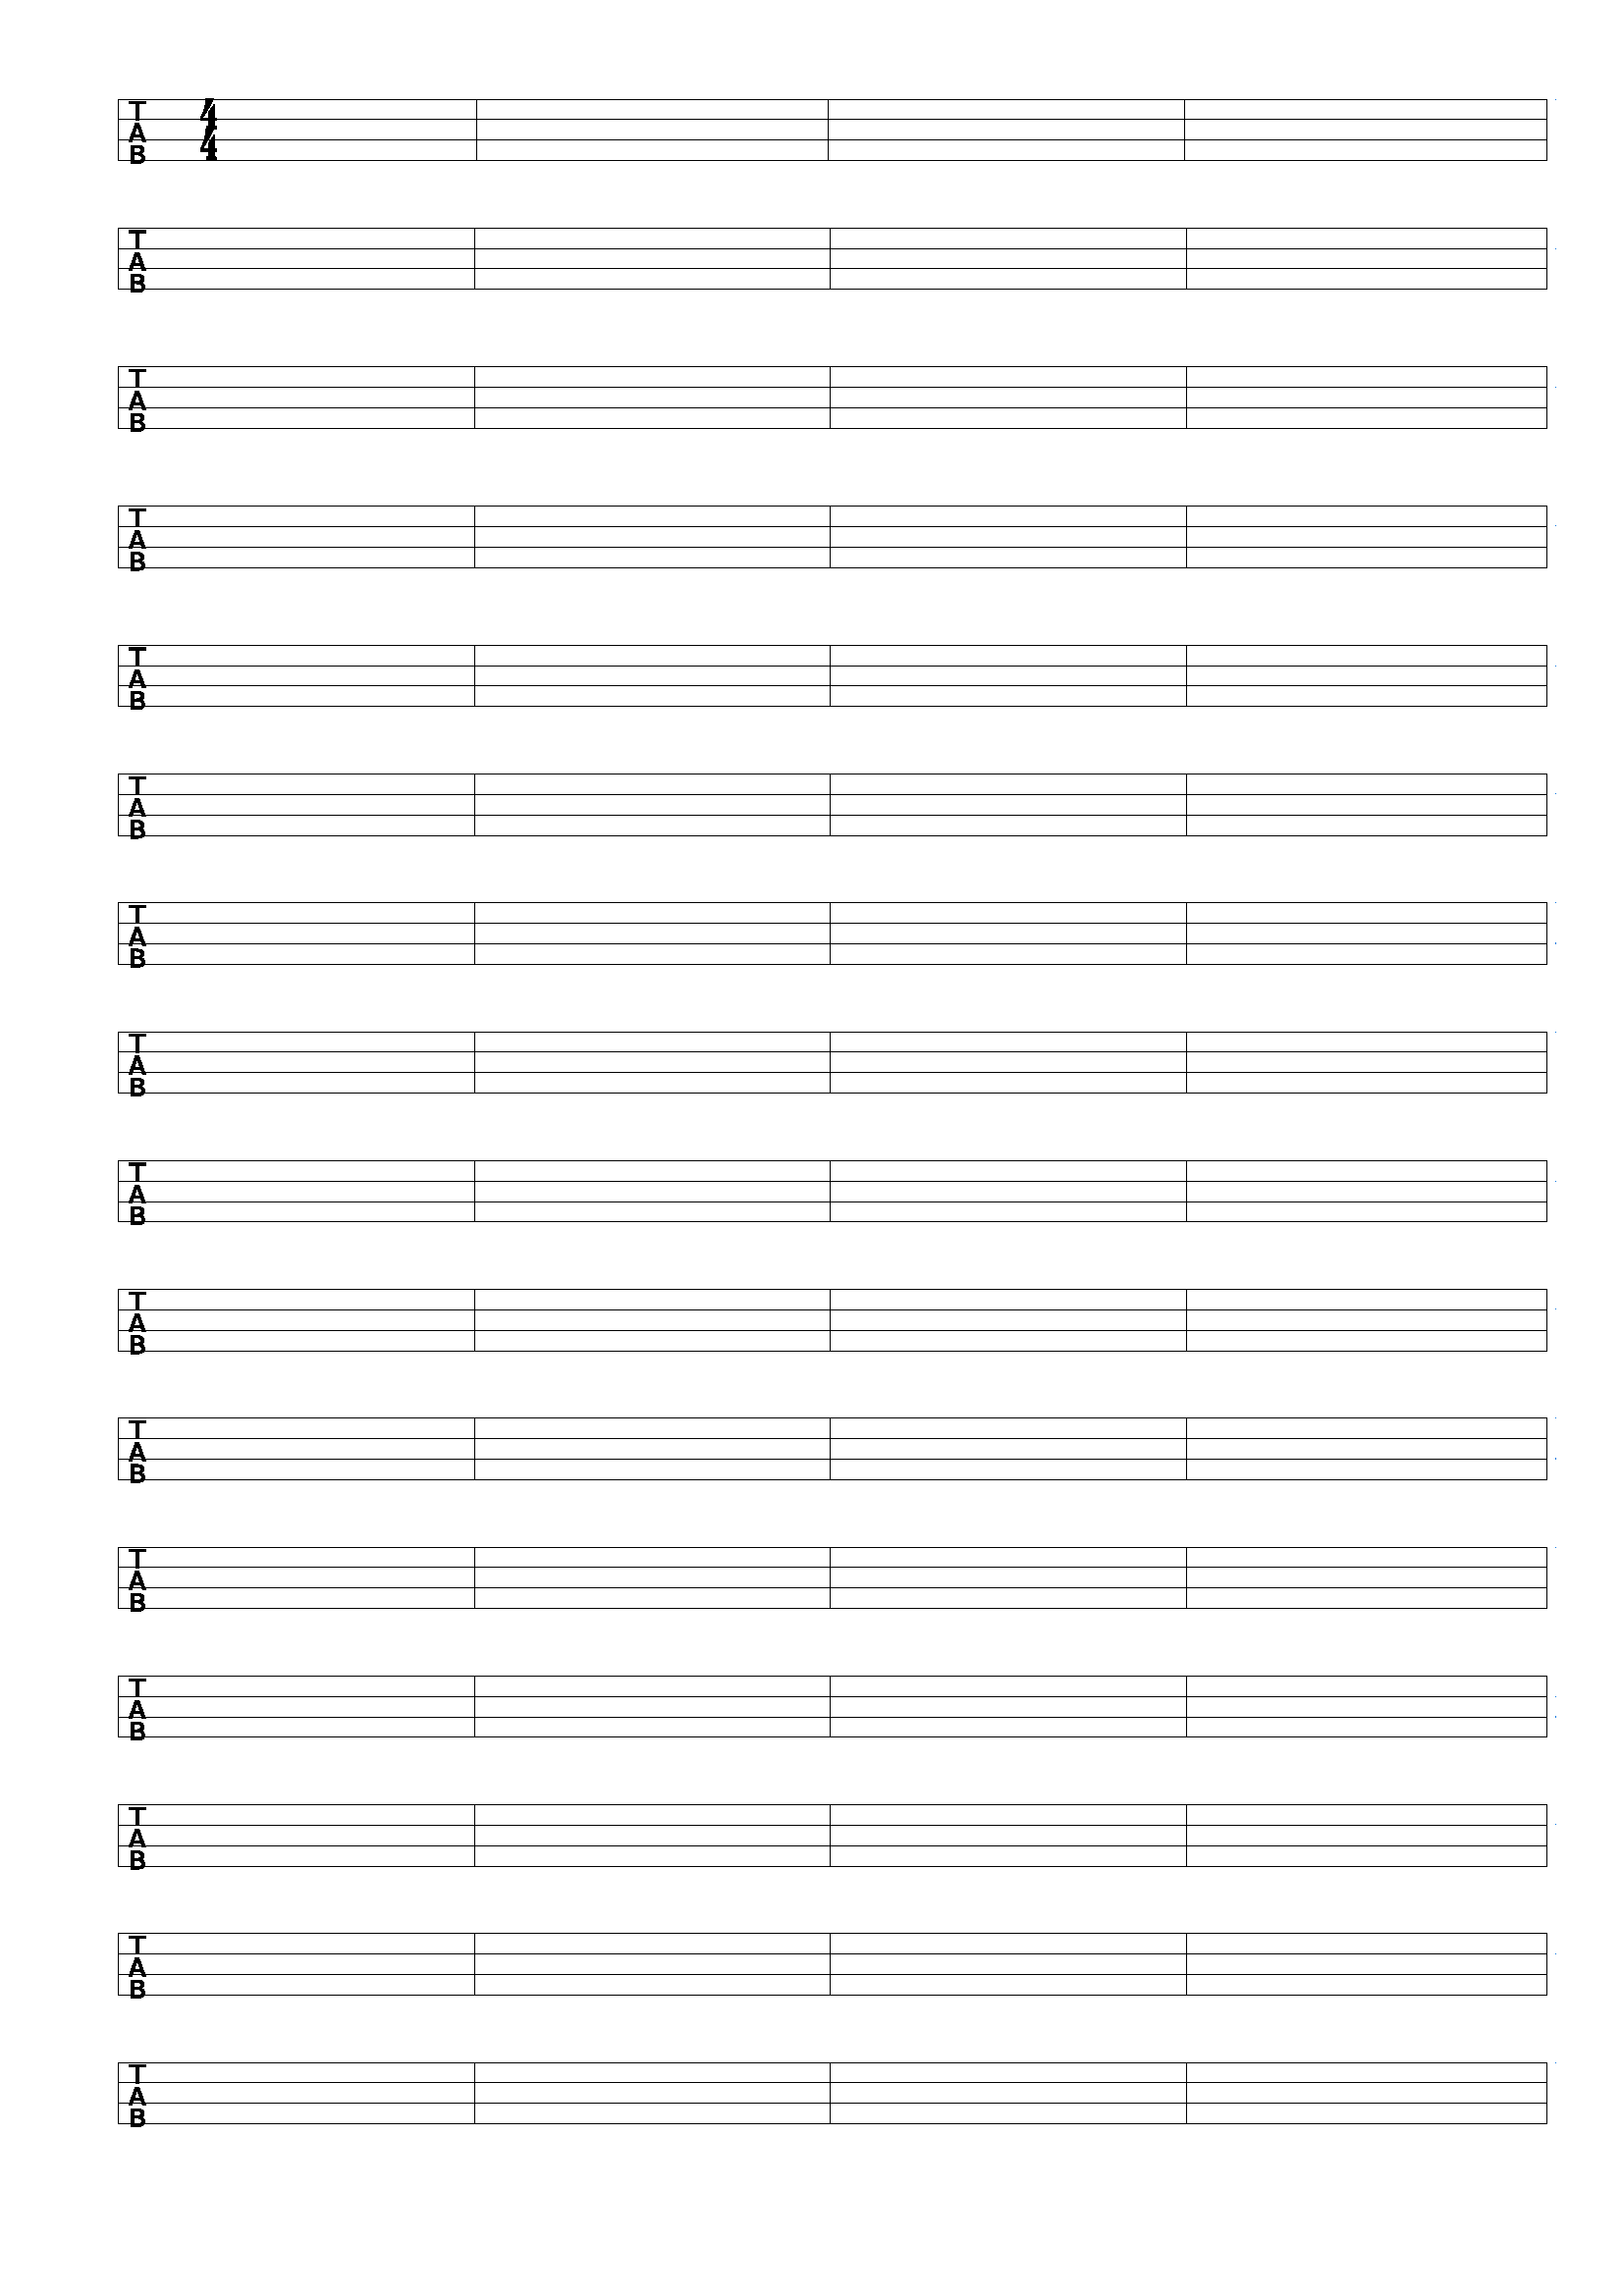 blank-guitar-ukulele-and-bass-sheet-music-for-hand-writing-guitar-tab-or-chord-charts-free